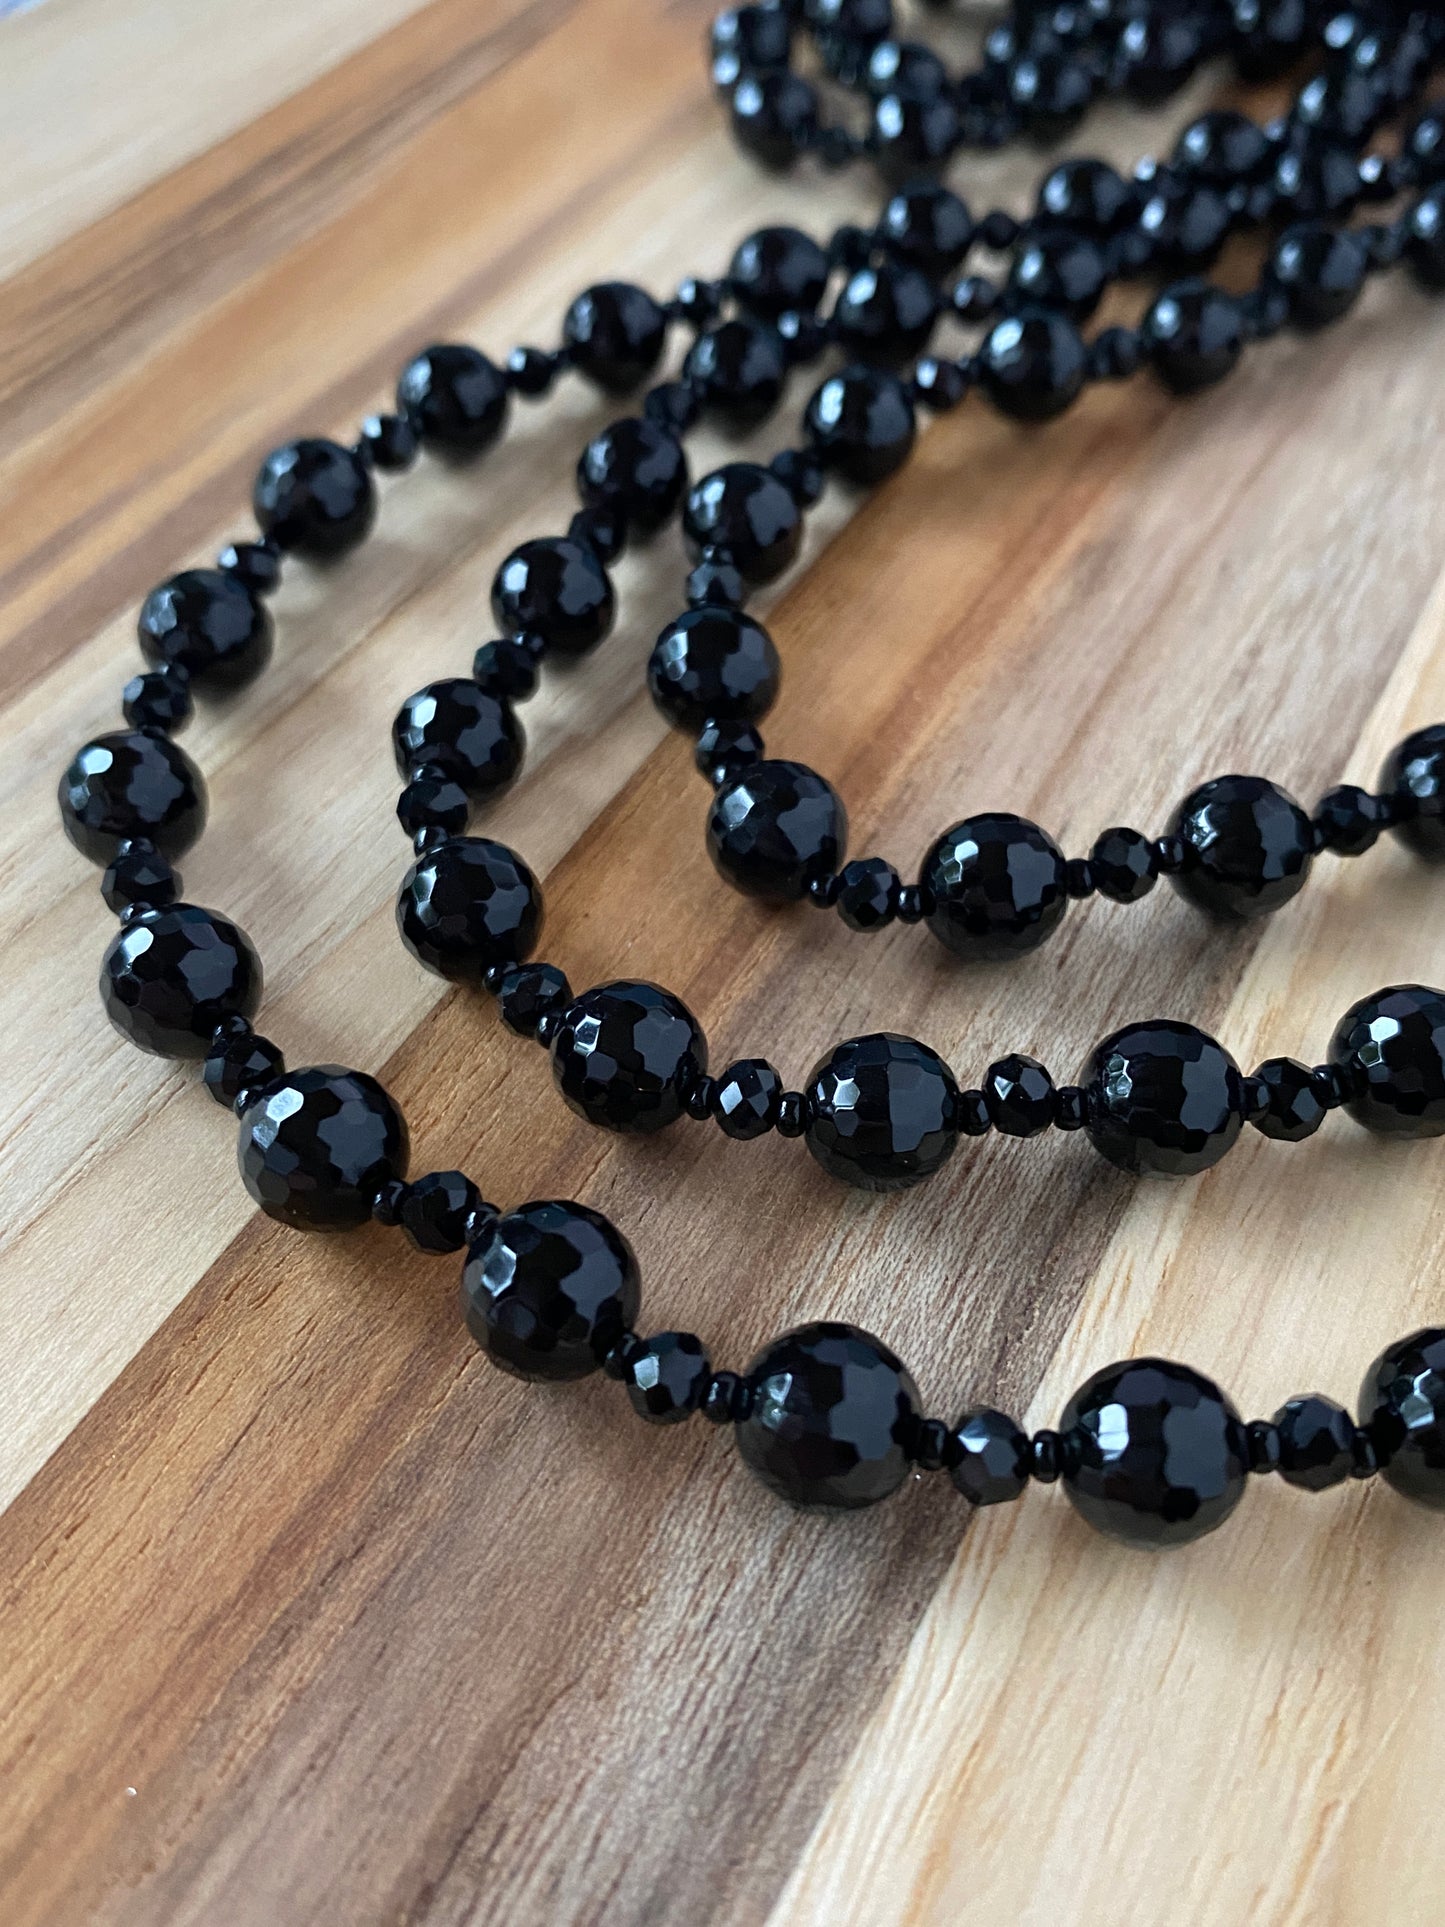 60" Extra Long Wraparound Faceted Black Onyx Necklace with Crystal beads